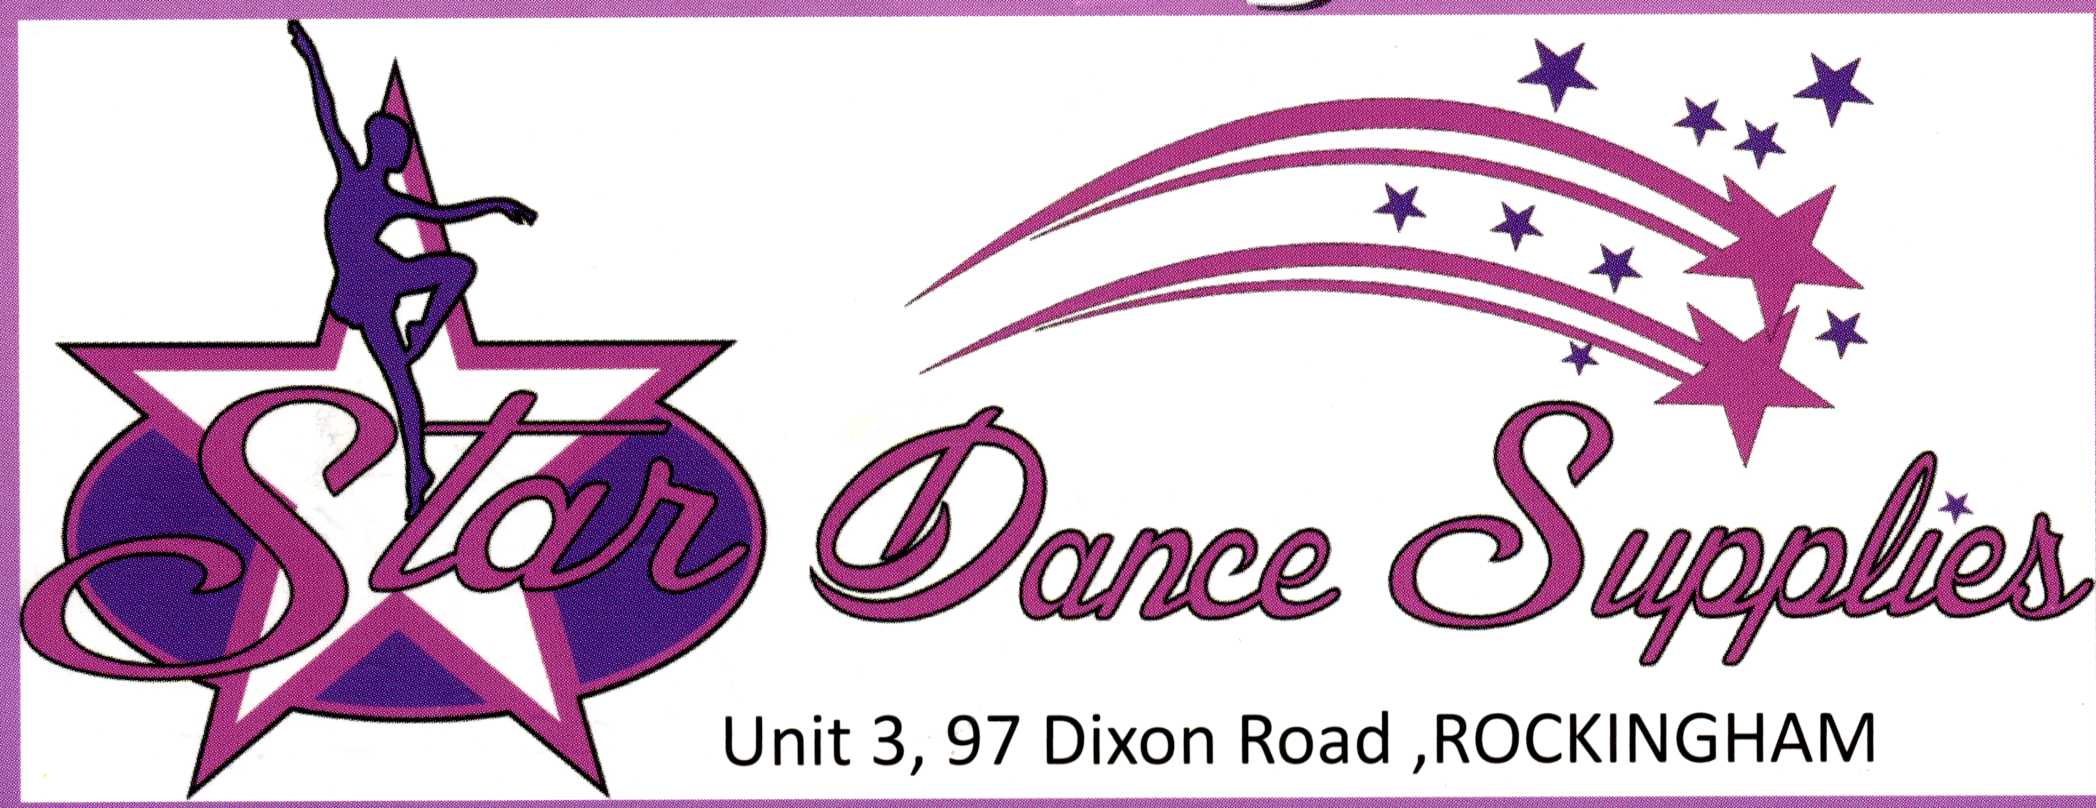 STAR DANCE SUPPLIES ⭐ AFFORDABLE DANCE SUPPLIES AND ACCESSORIES - SALES BROWSE ONLINE